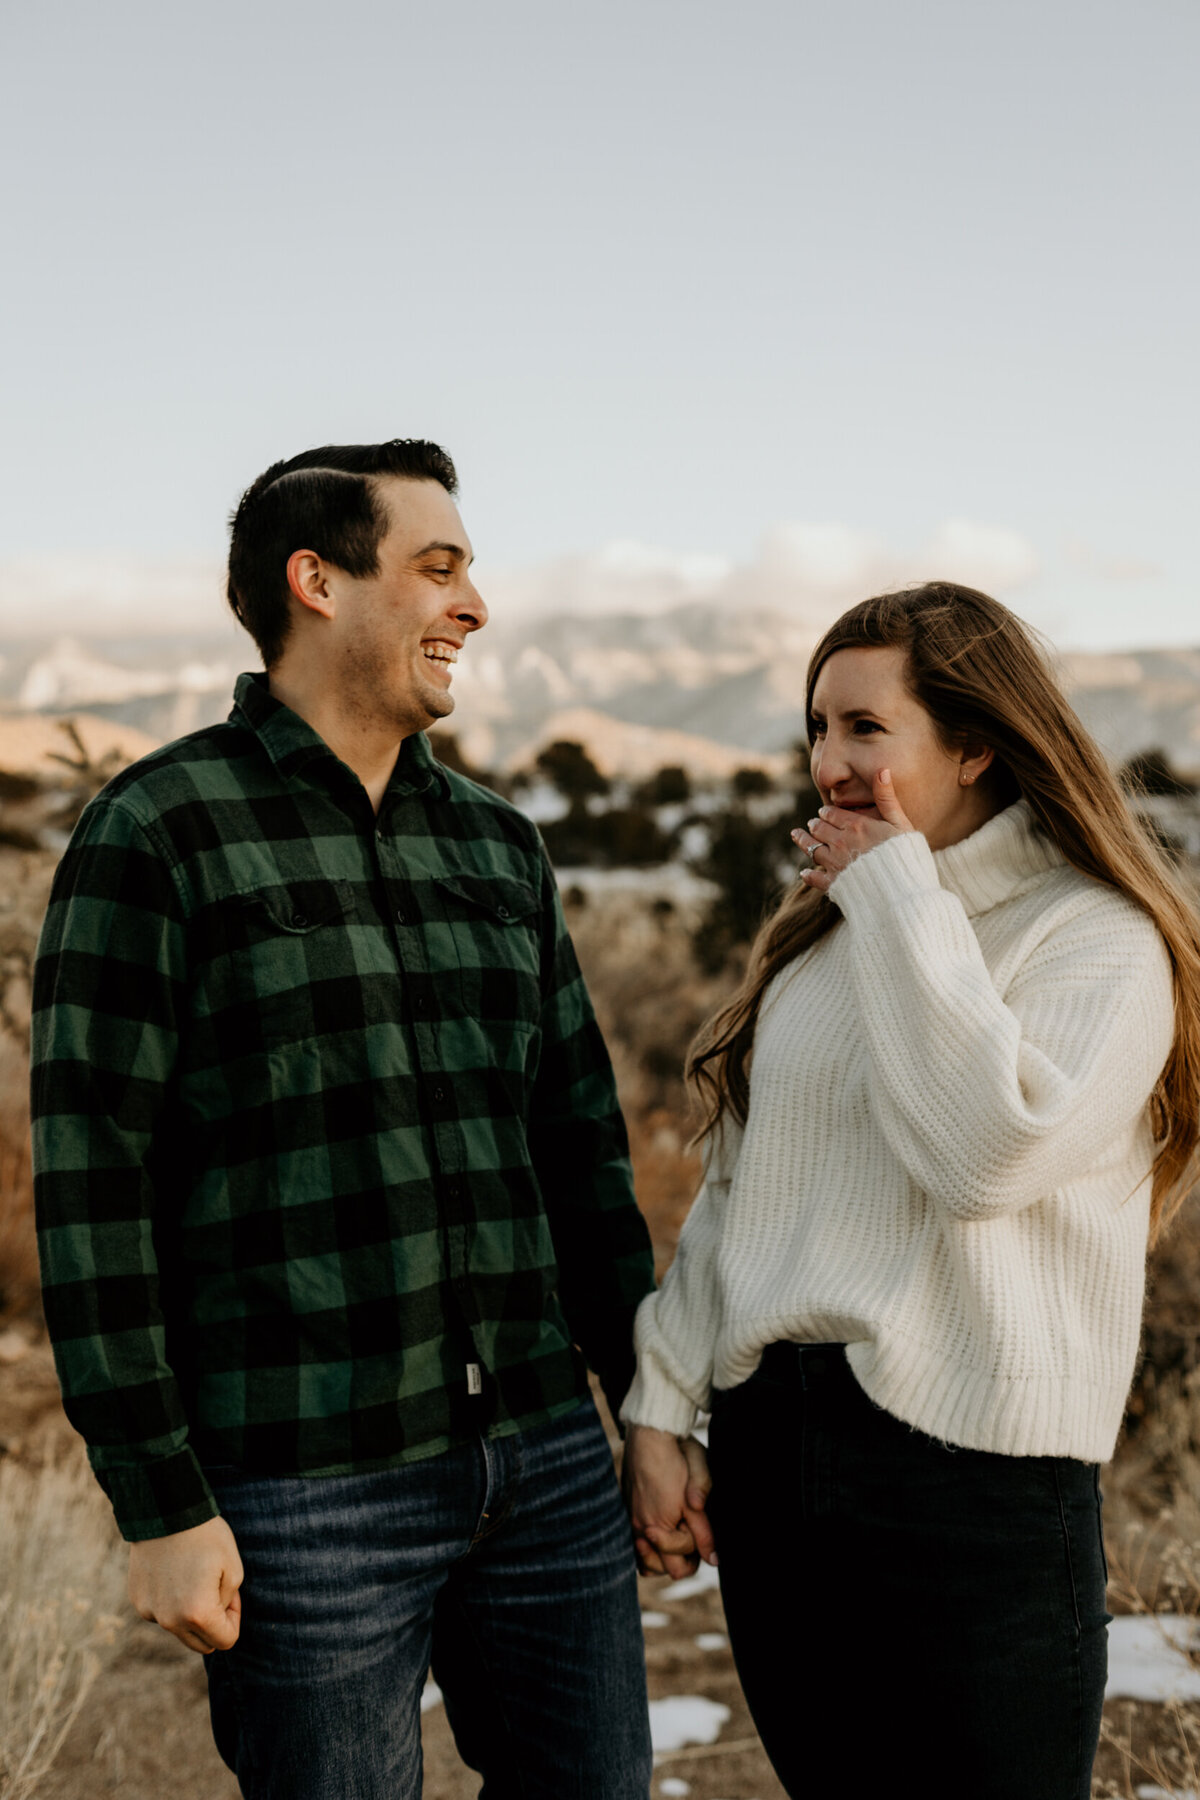 engaged couple laughing together in the desert